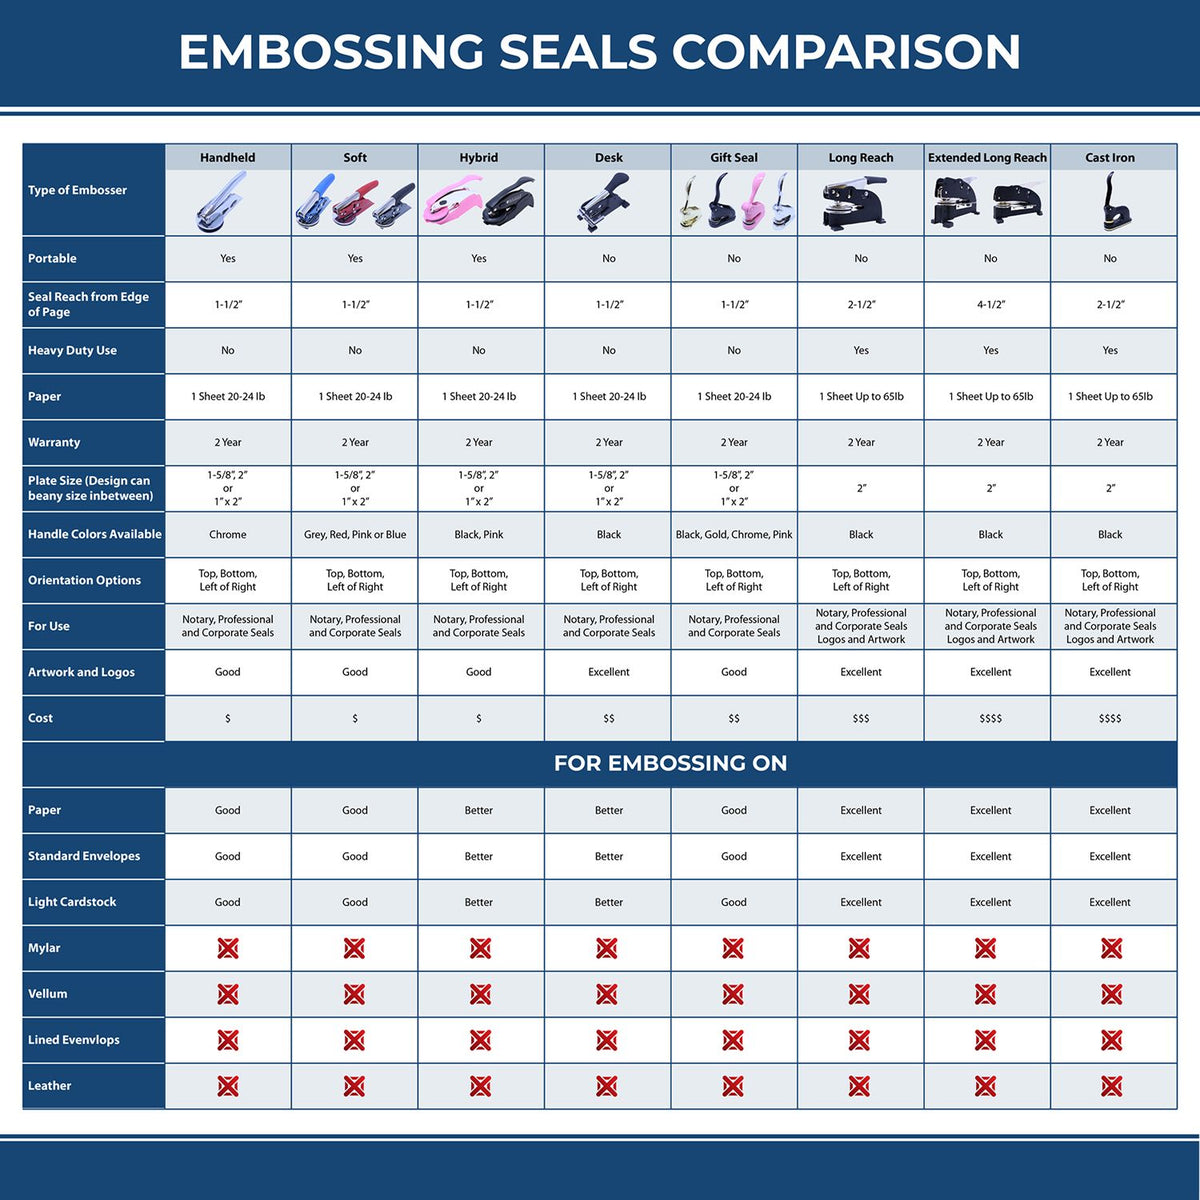 A comparison chart for the different types of mount models available for the State of New York Soft Land Surveyor Embossing Seal.